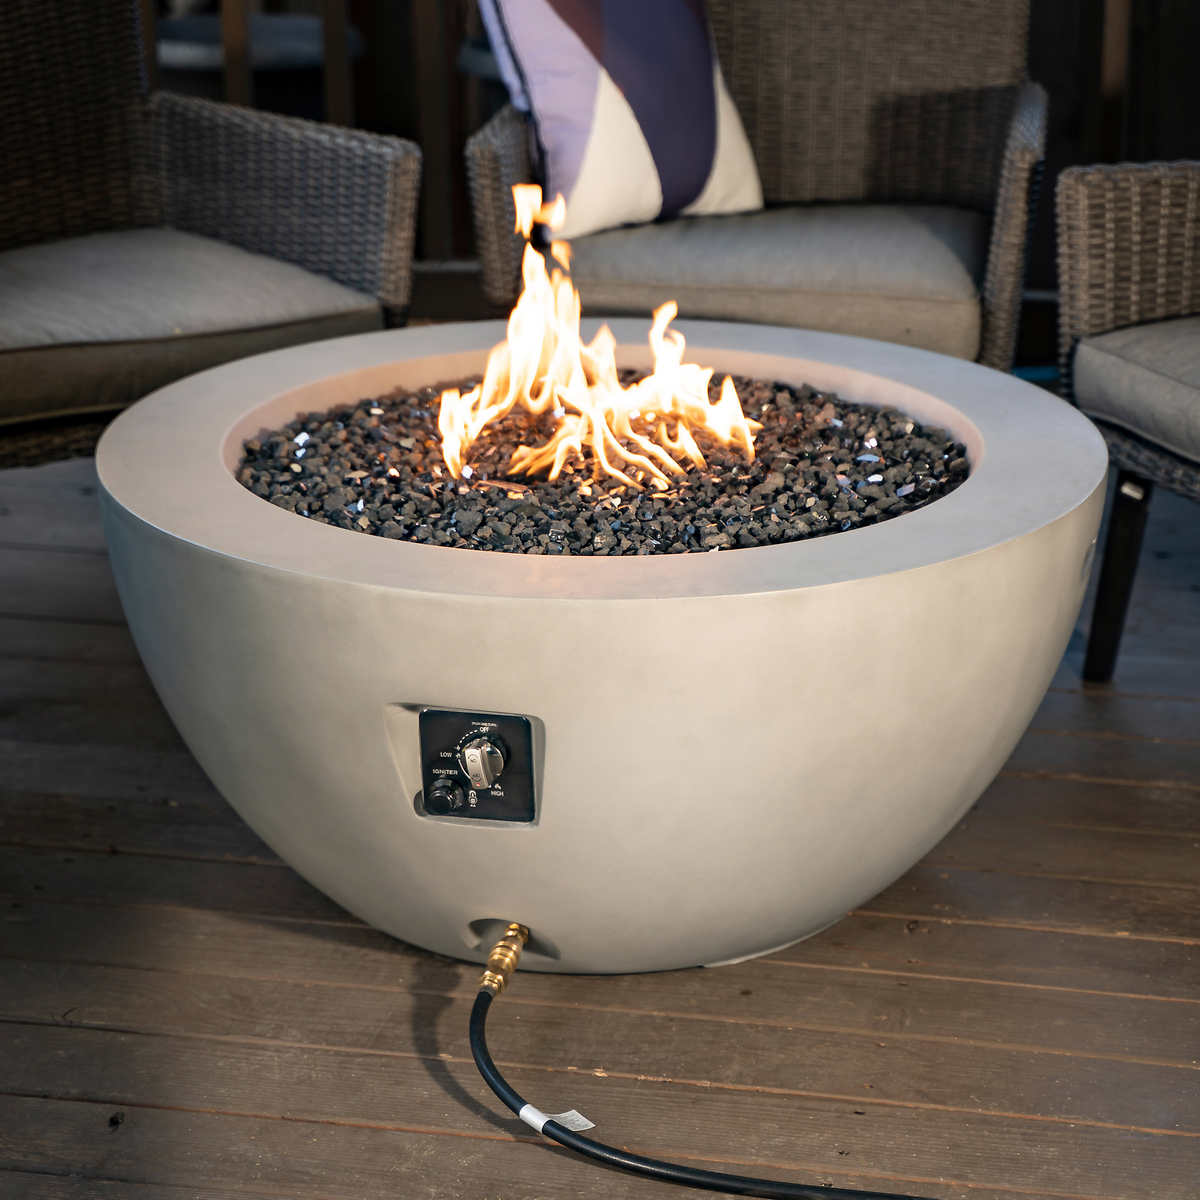 Faux Concrete Gas Fire Pit Costco, Can You Convert Any Propane Fire Pit To Natural Gas